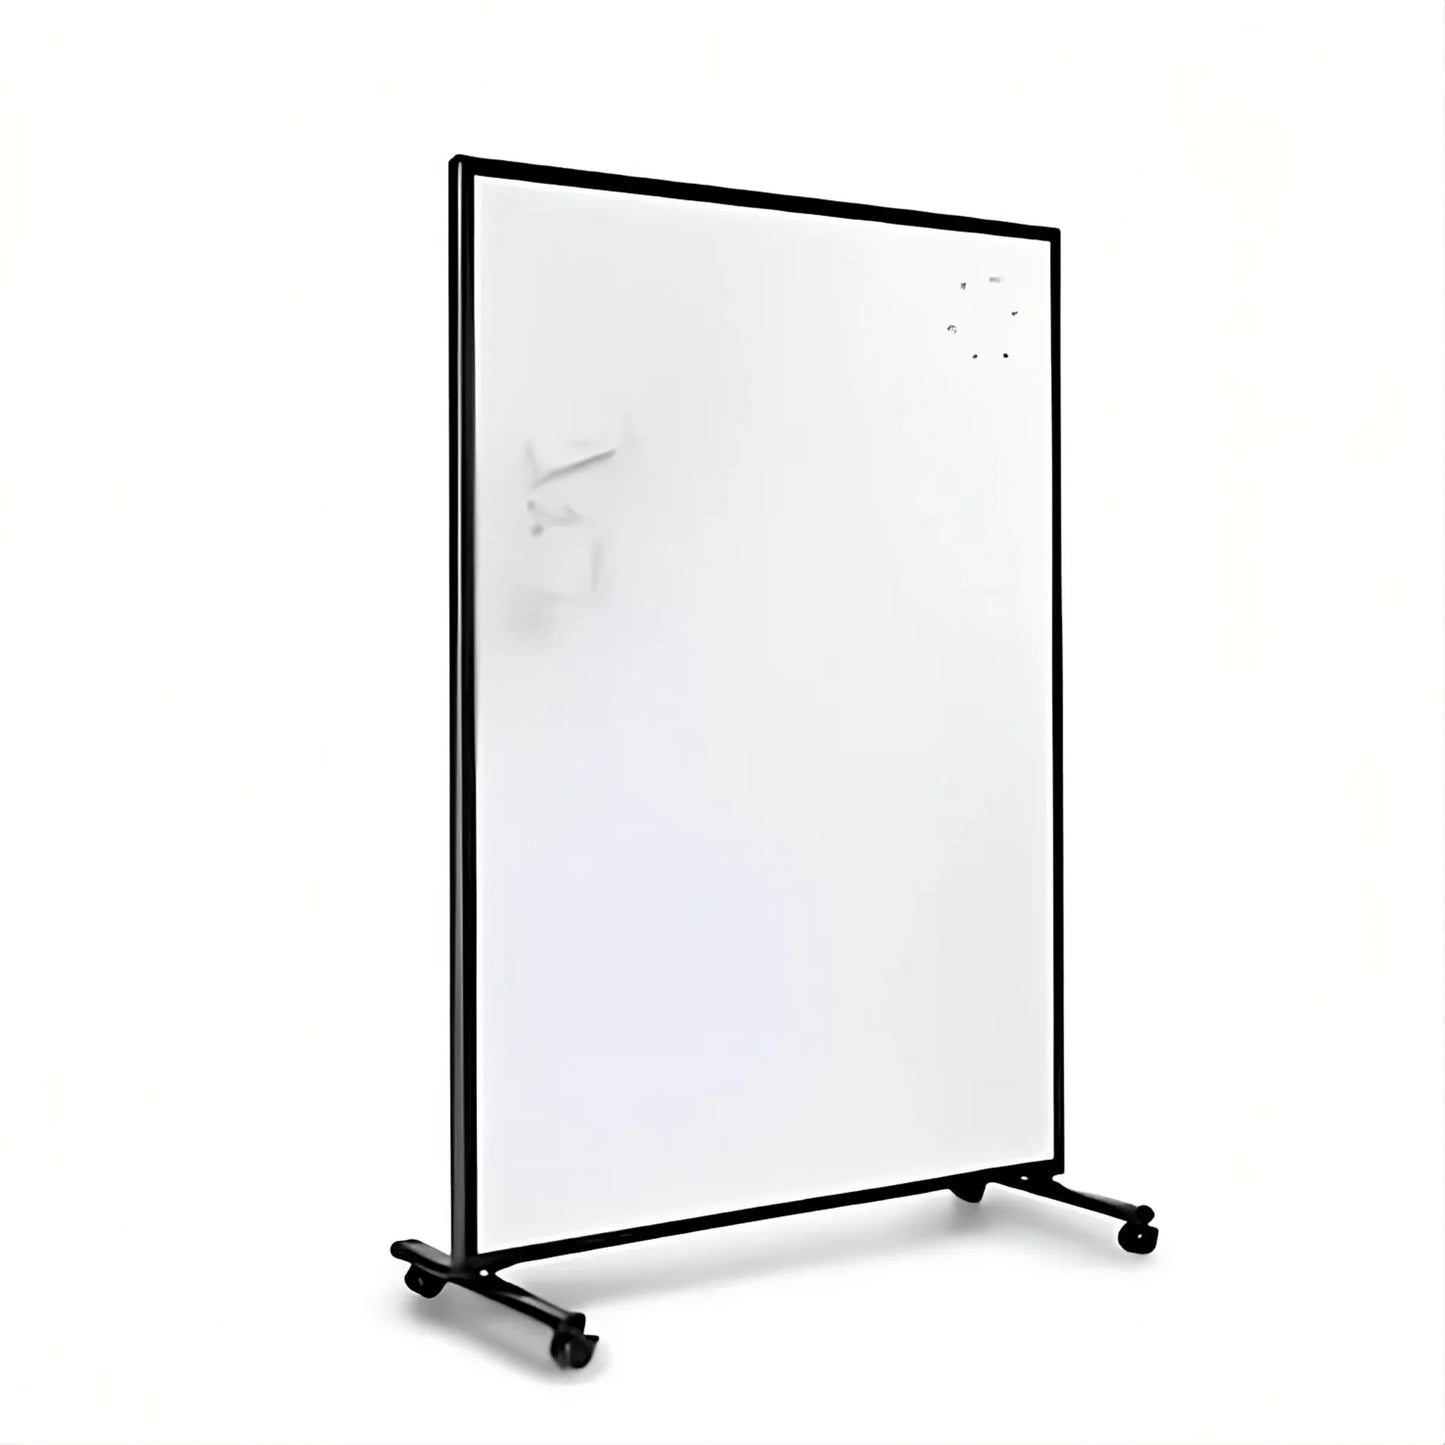 ViewFinder Mobile Whiteboard -  Magnetic Laminate Surface